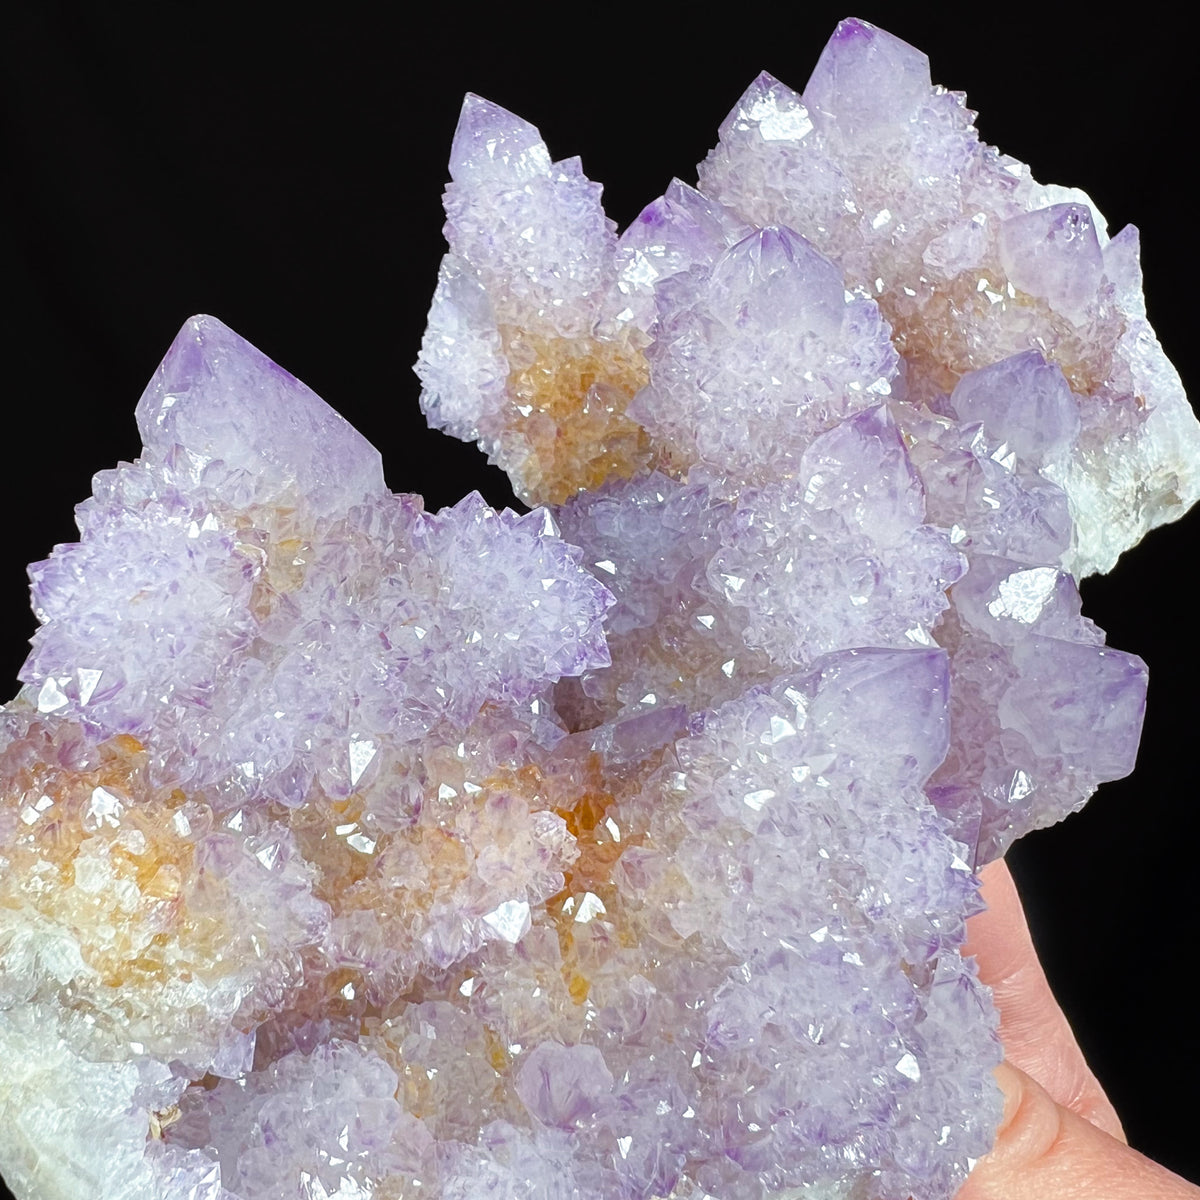 Large Amethyst Crystal Specimen from South Africa